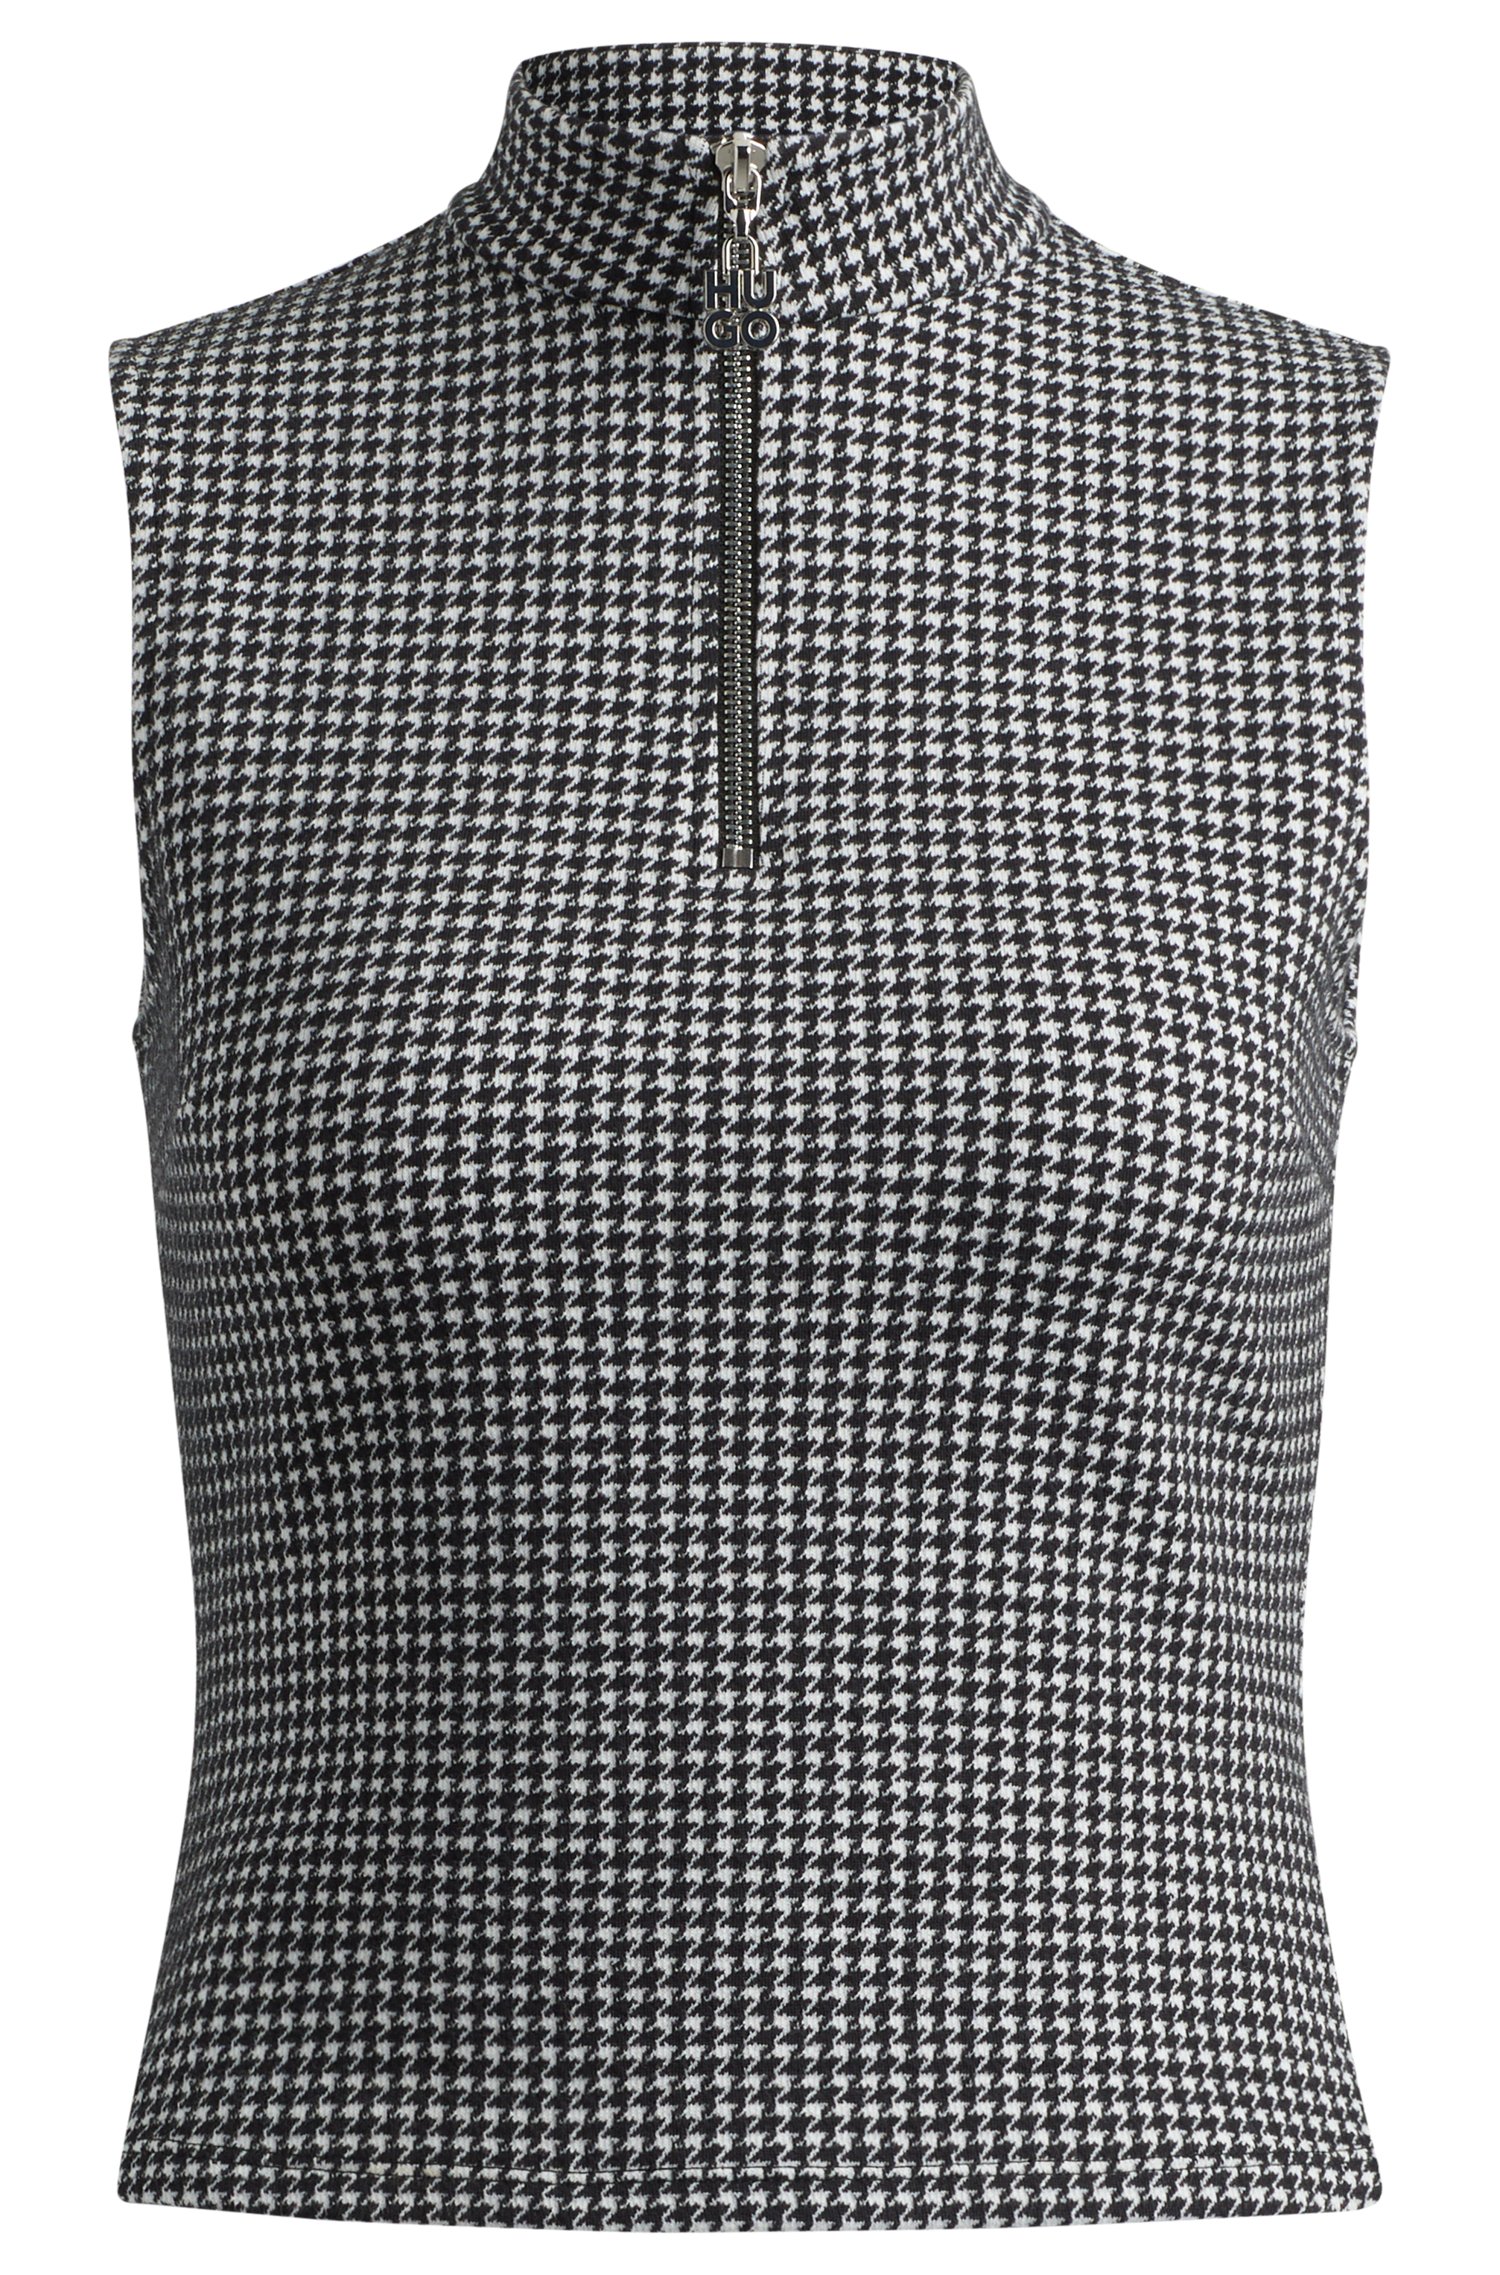 Top houndstooth jacquard with zip closure